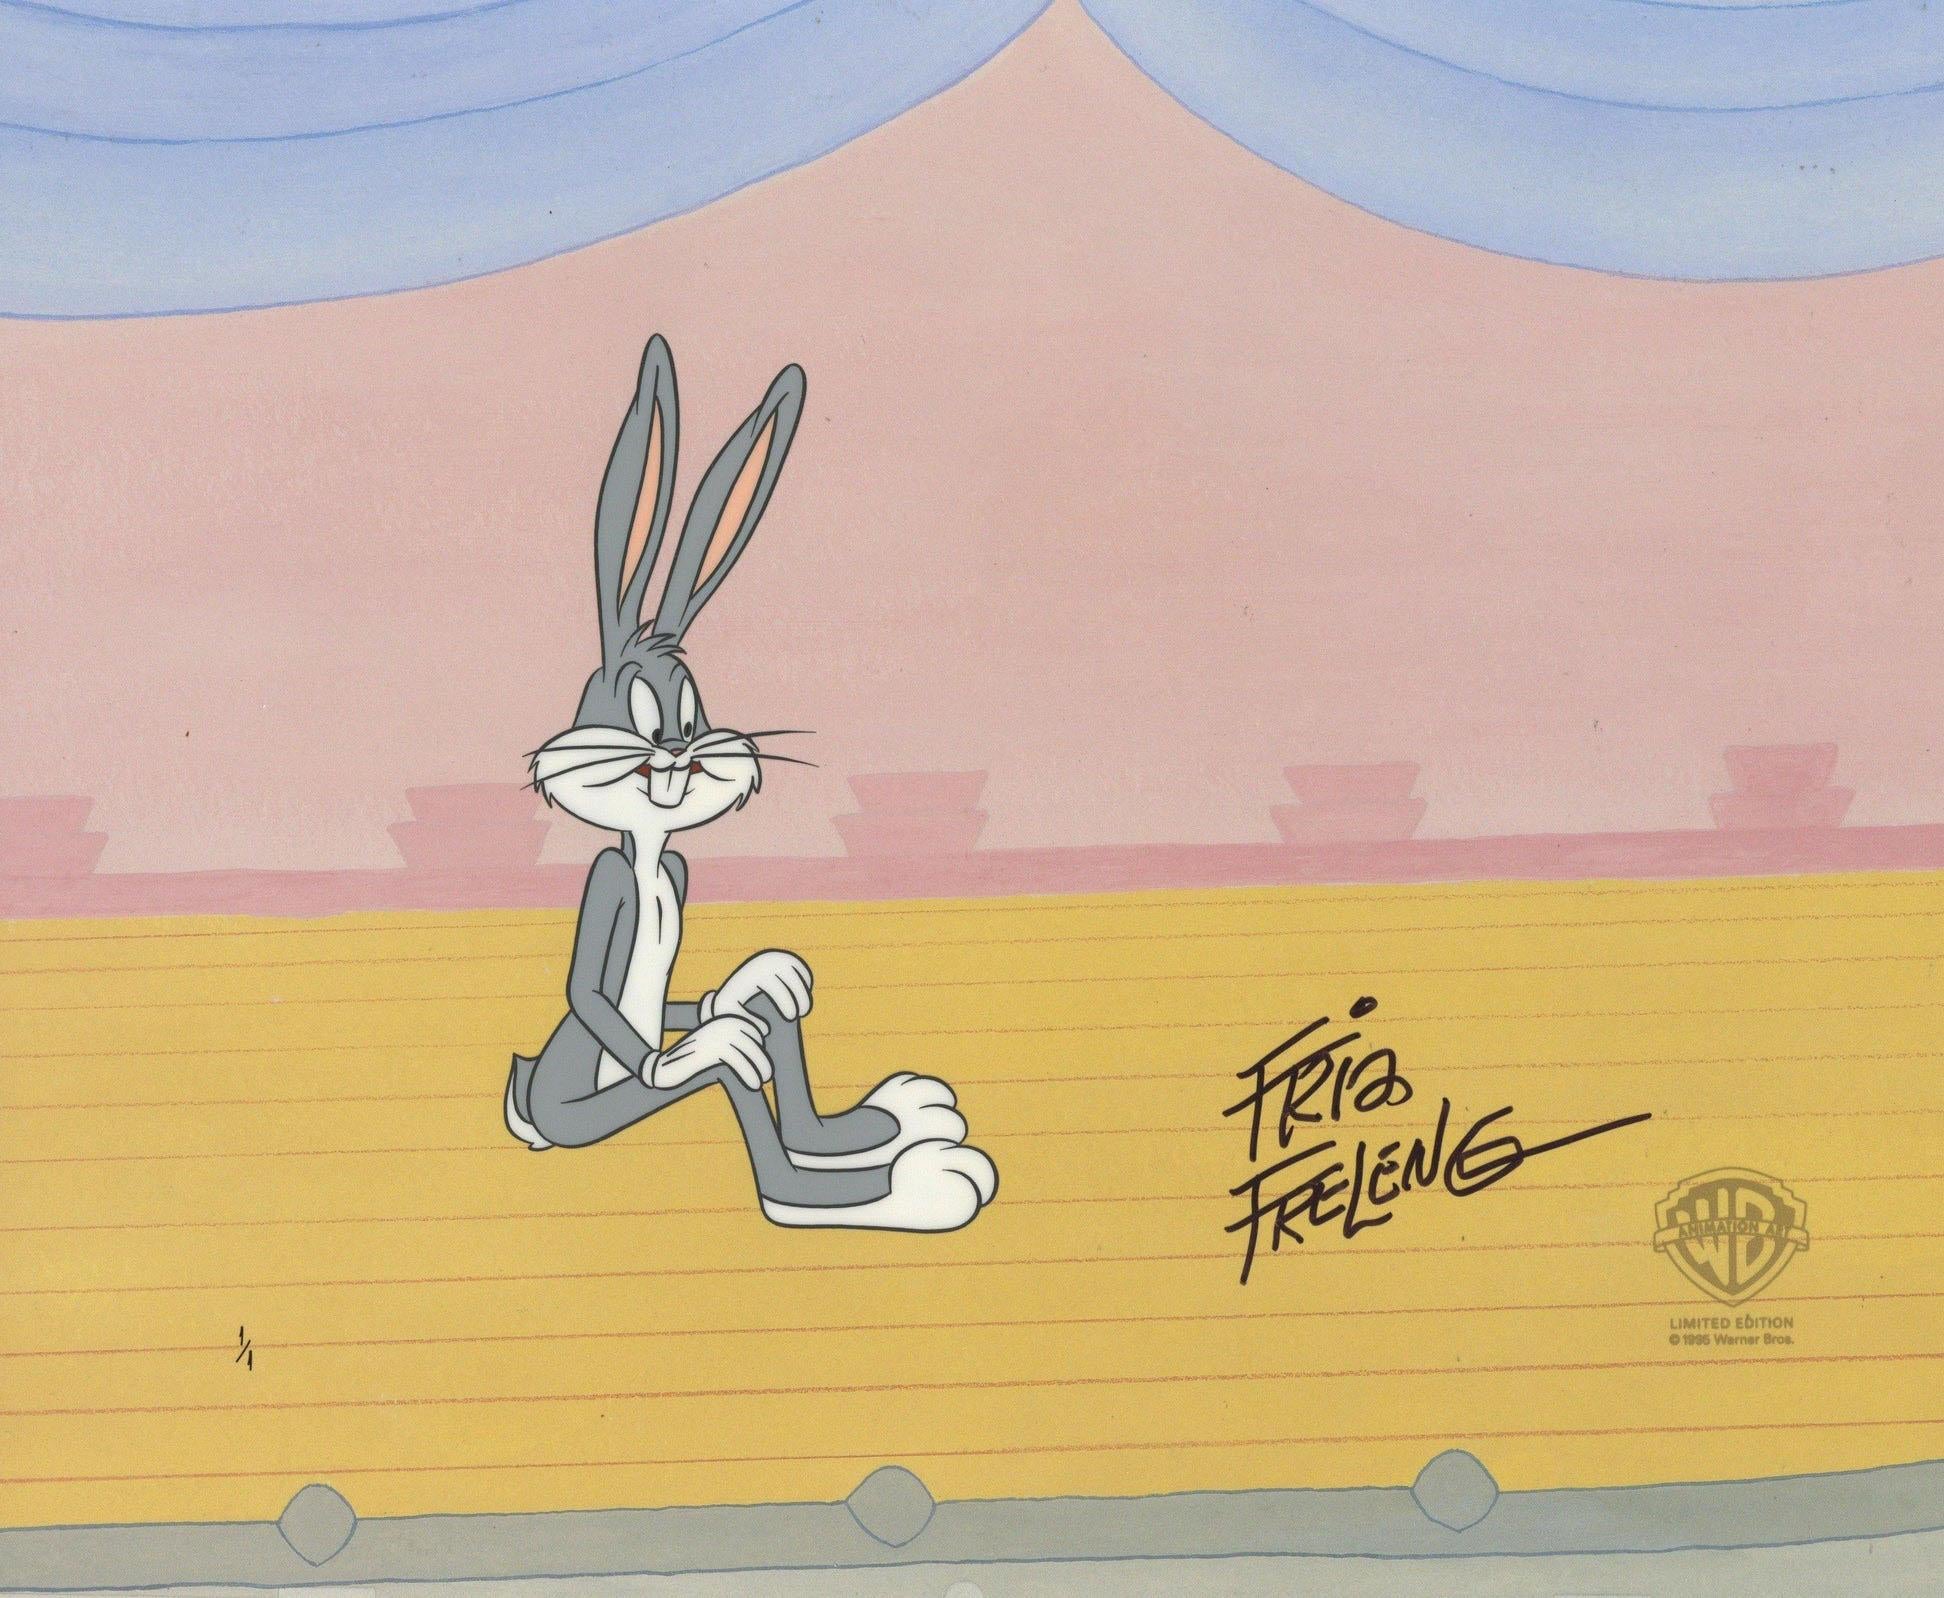 Looney Tunes Original Production Cel with Matching Drawing: Bugs Bunny - Art by Warner Bros. Studio Artists